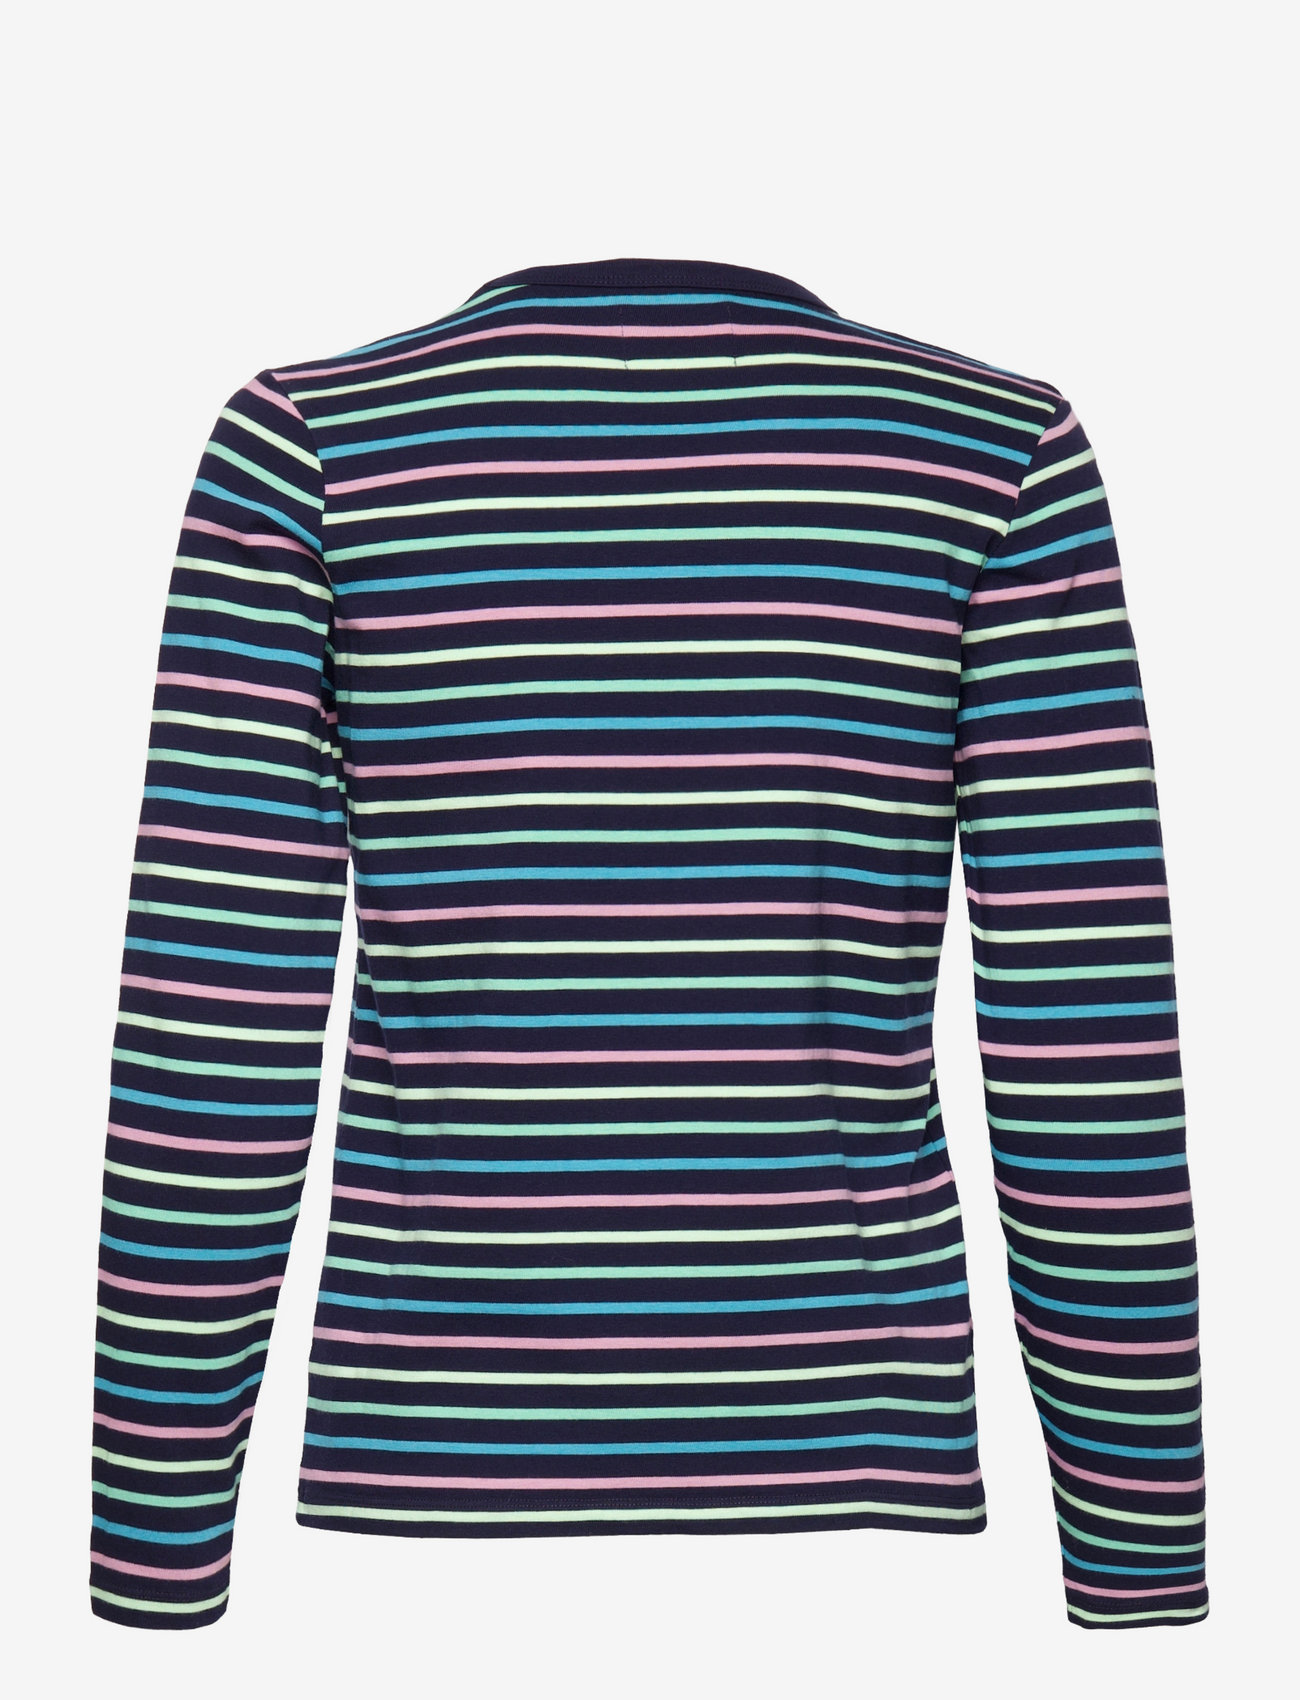 Double A by Wood Wood - Moa stripe long sleeve - t-shirts & tops - navy stripes - 1